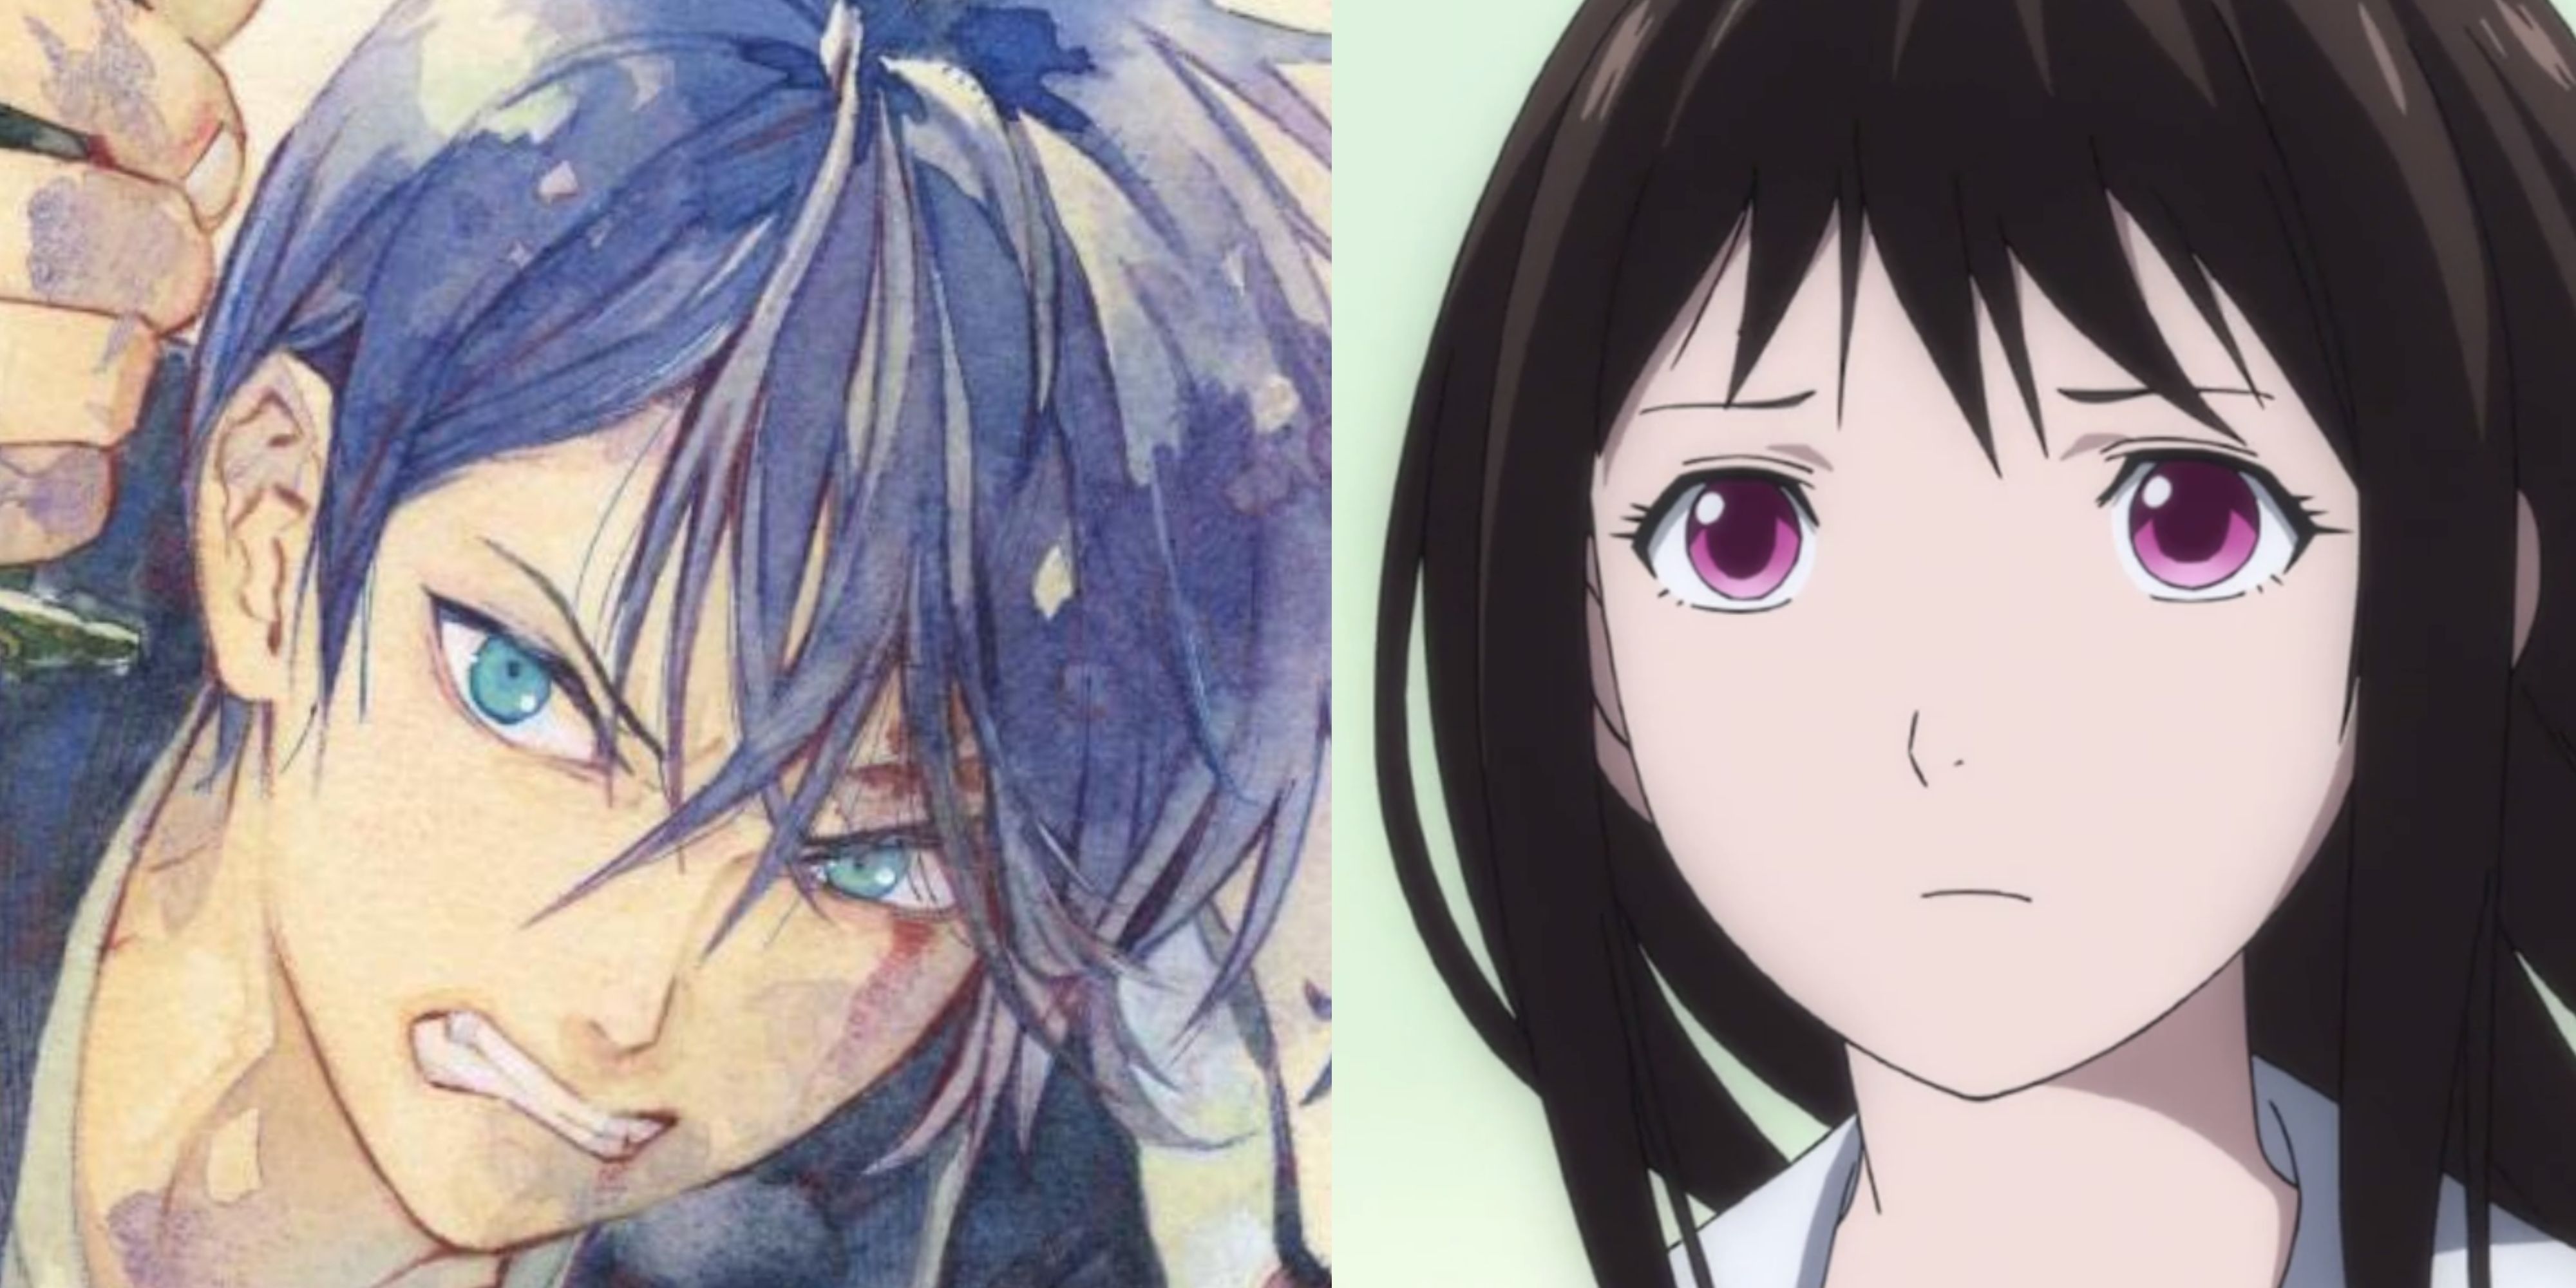 Download wallpaper Anime, Noragami, Yato., If that wait, section shonen in  resolution 1280x1024